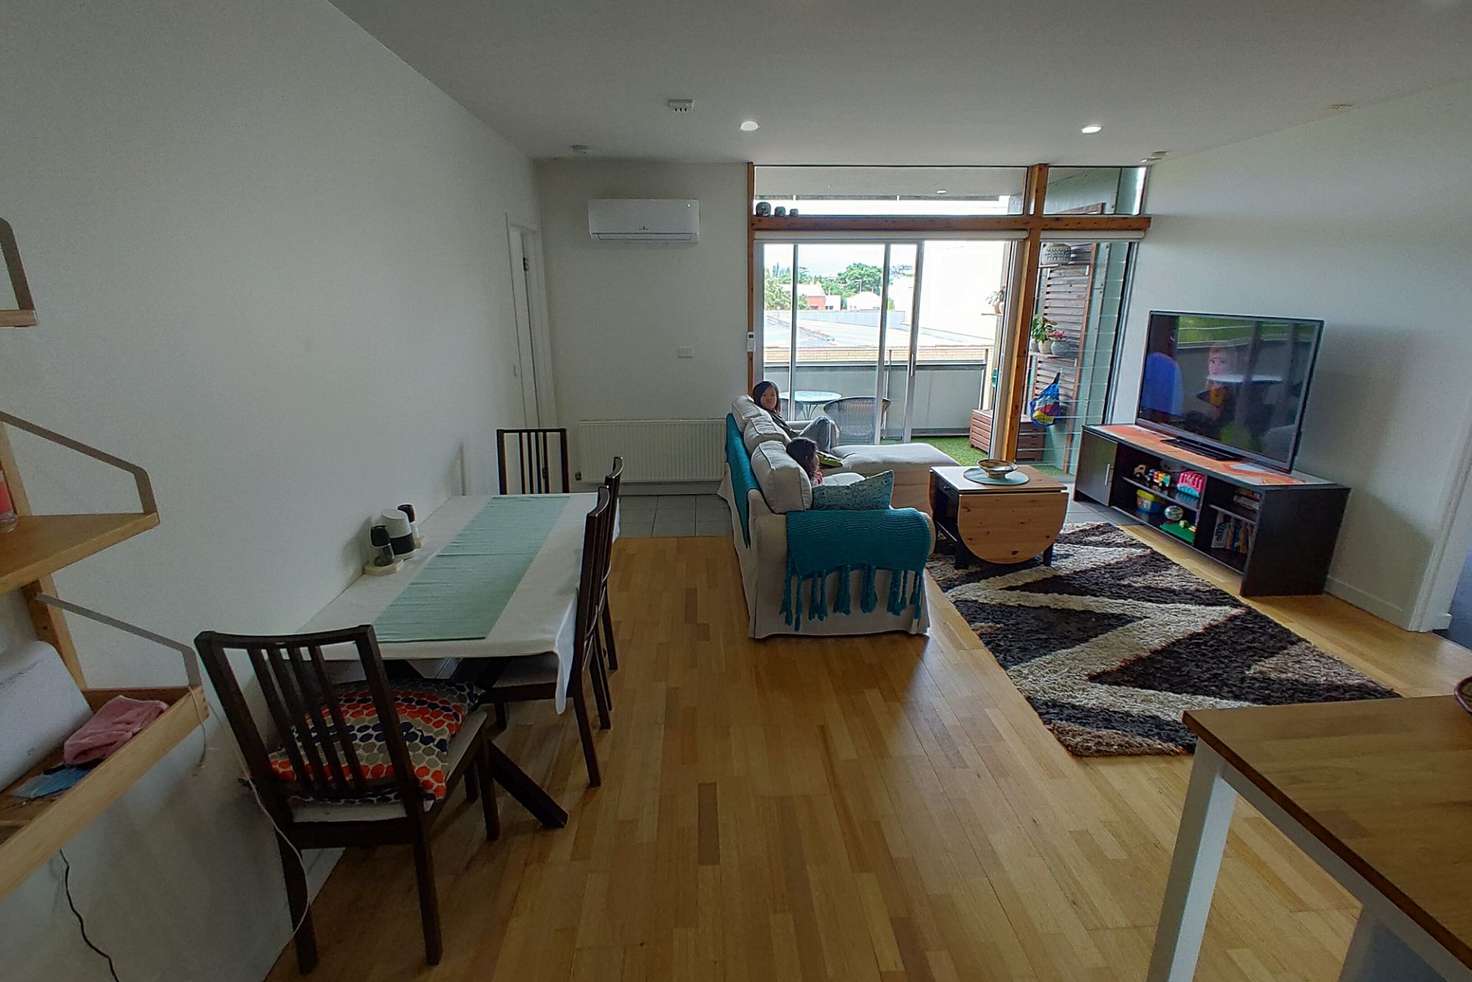 Main view of Homely unit listing, 407/7 Greeves St, St Kilda VIC 3182